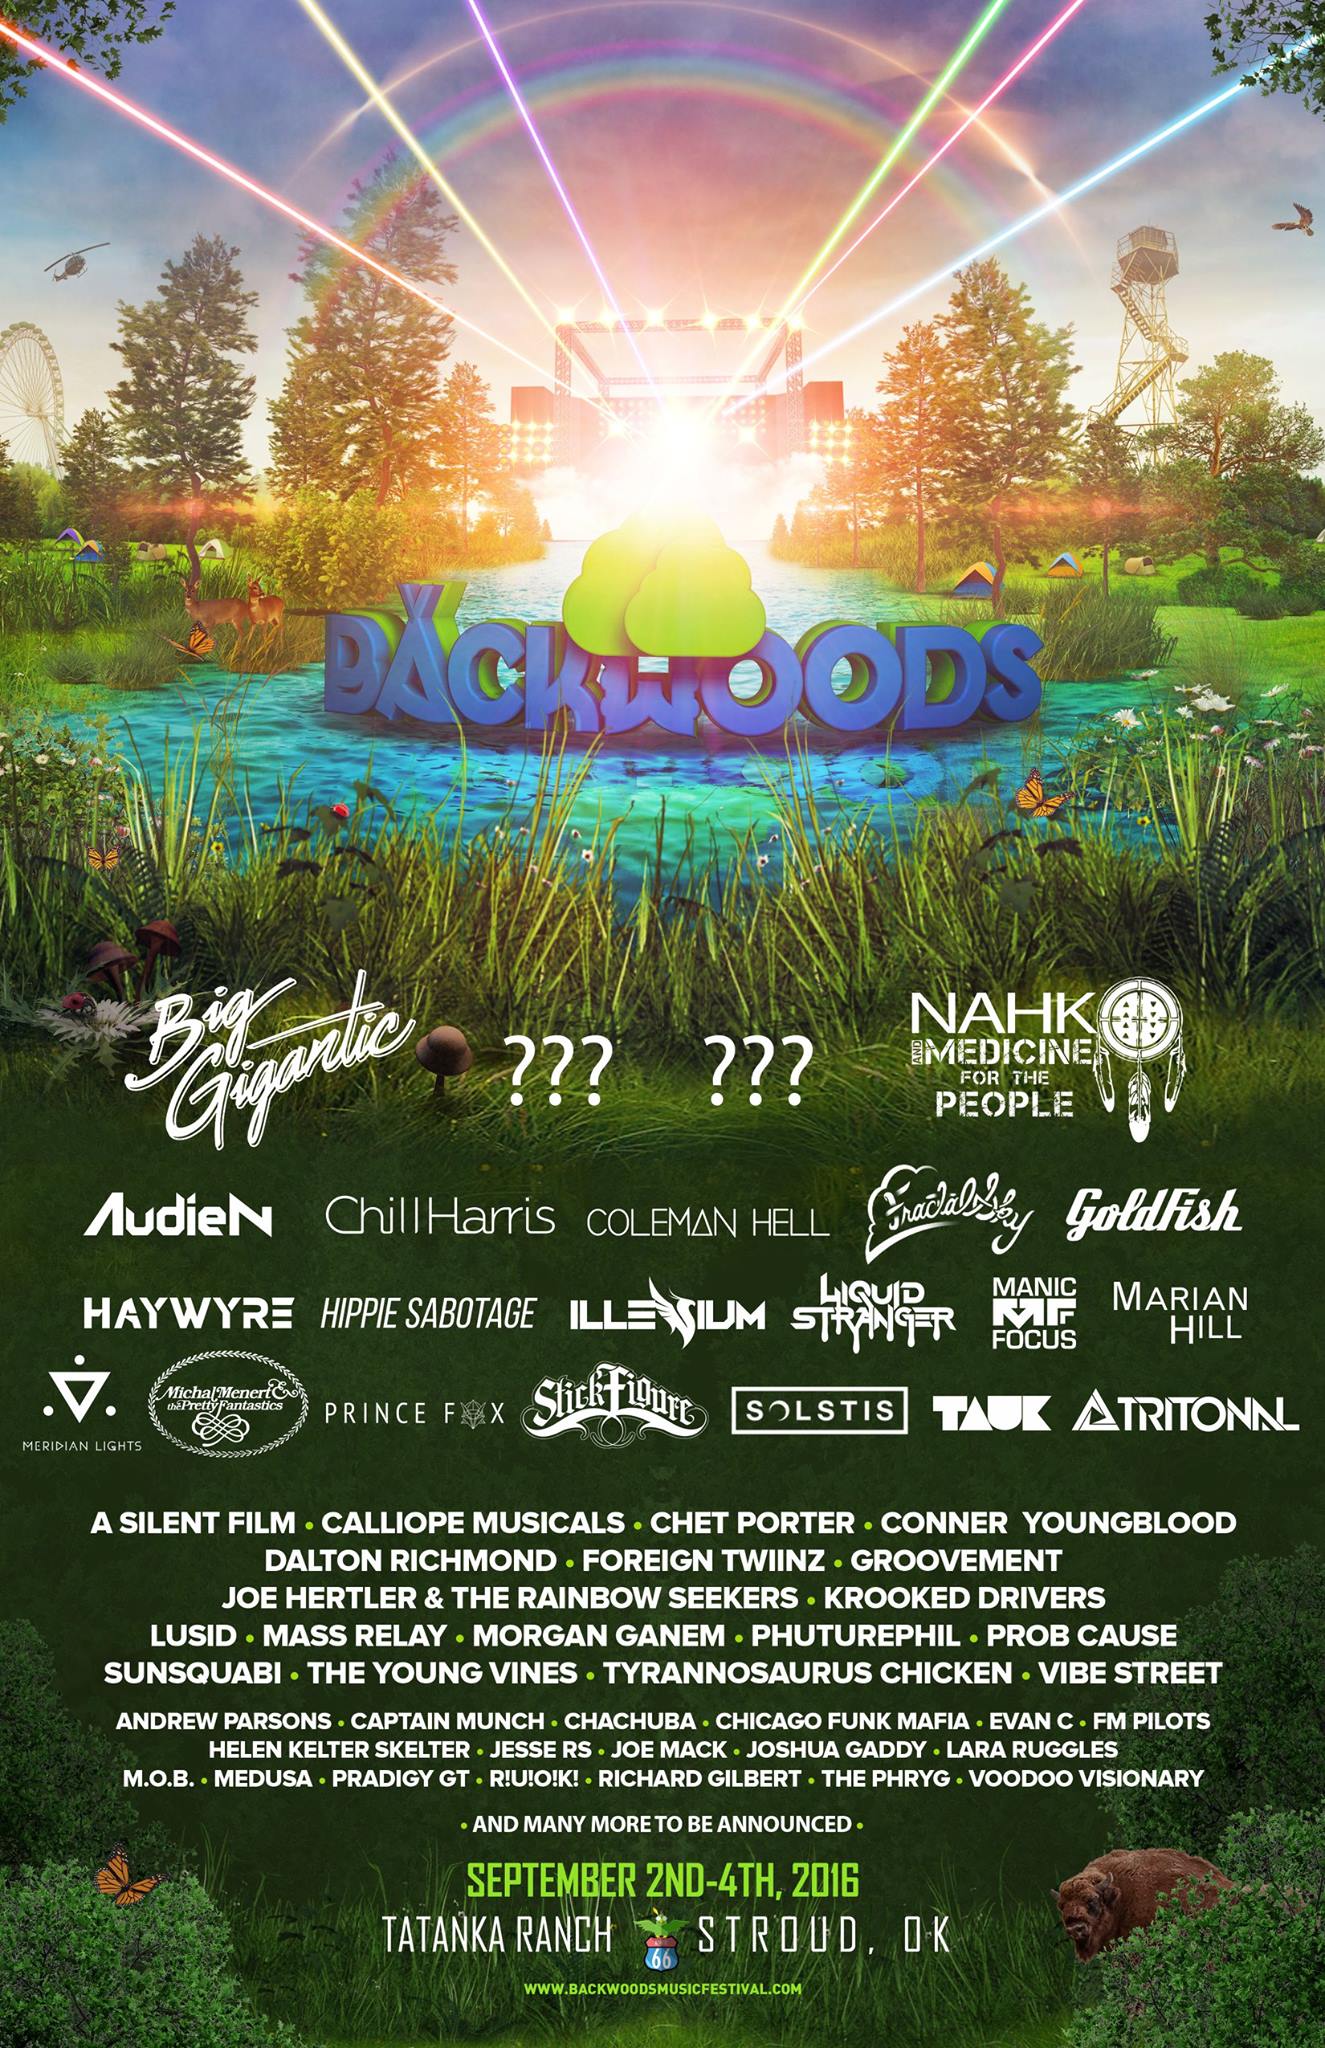 Backwoods Festival reveals phase one lineup for Labor Day weekend